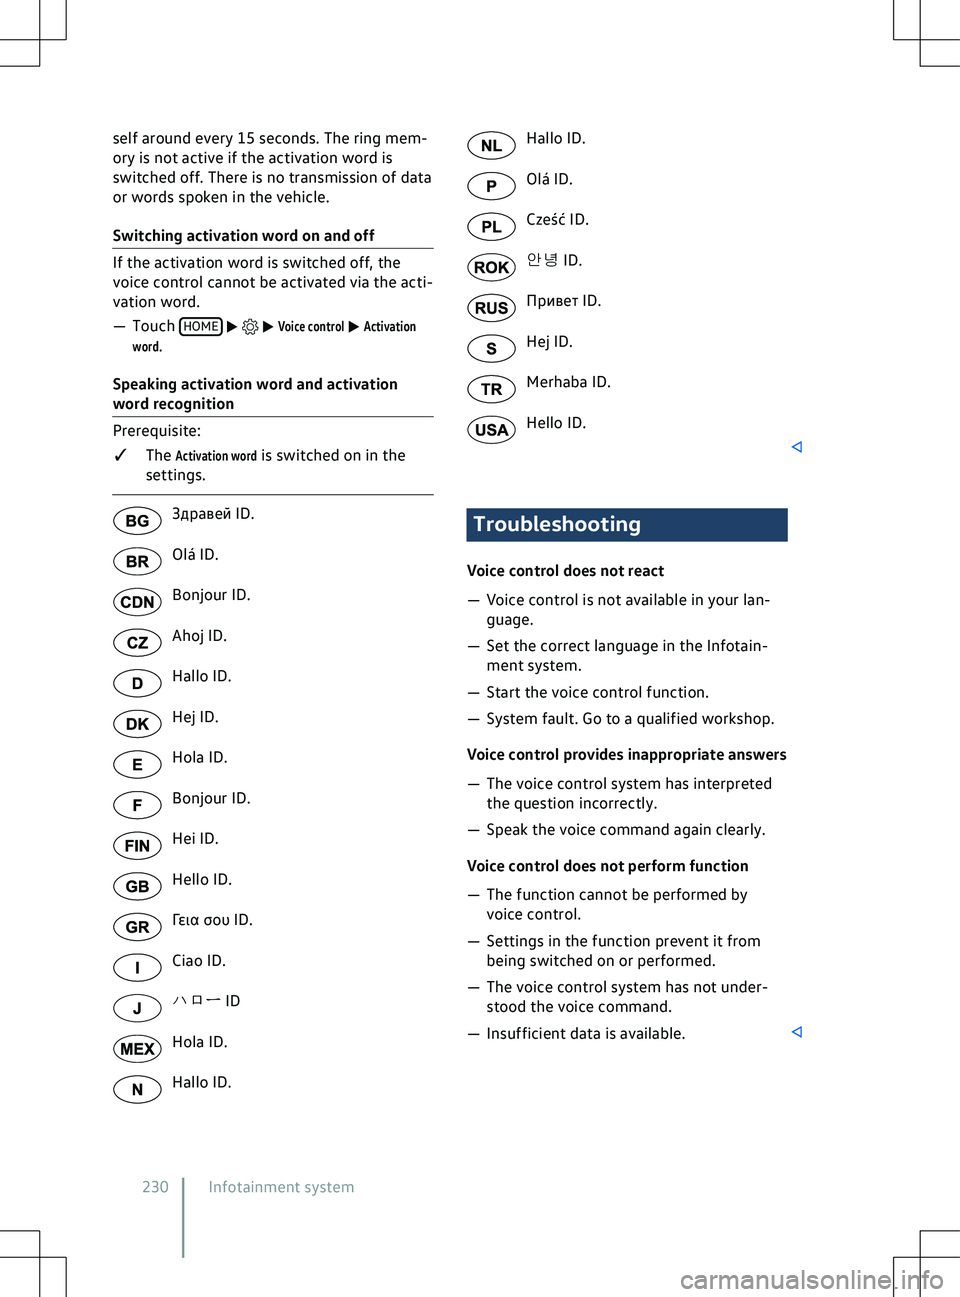 VOLKSWAGEN ID.4 2021  Owners Manual self around every 15 seconds. The ring mem-
ory is not activ e if the activation word is
switched off. There is no transmission of data
or words spoken in the vehicle.
Switching activation word on and